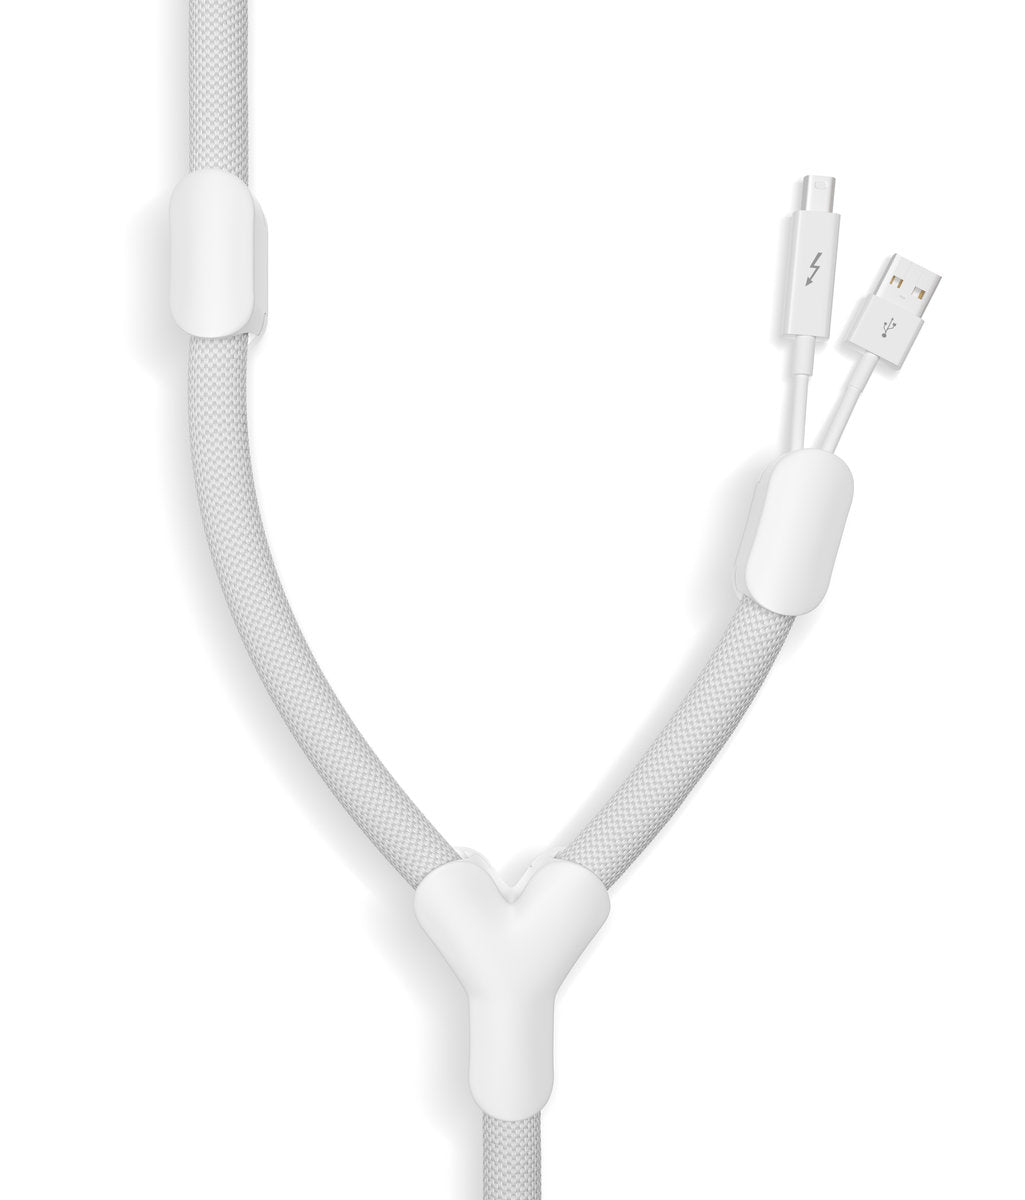 Bluelounge - Soba Cable Director Cord Storage and Organizing Set - White